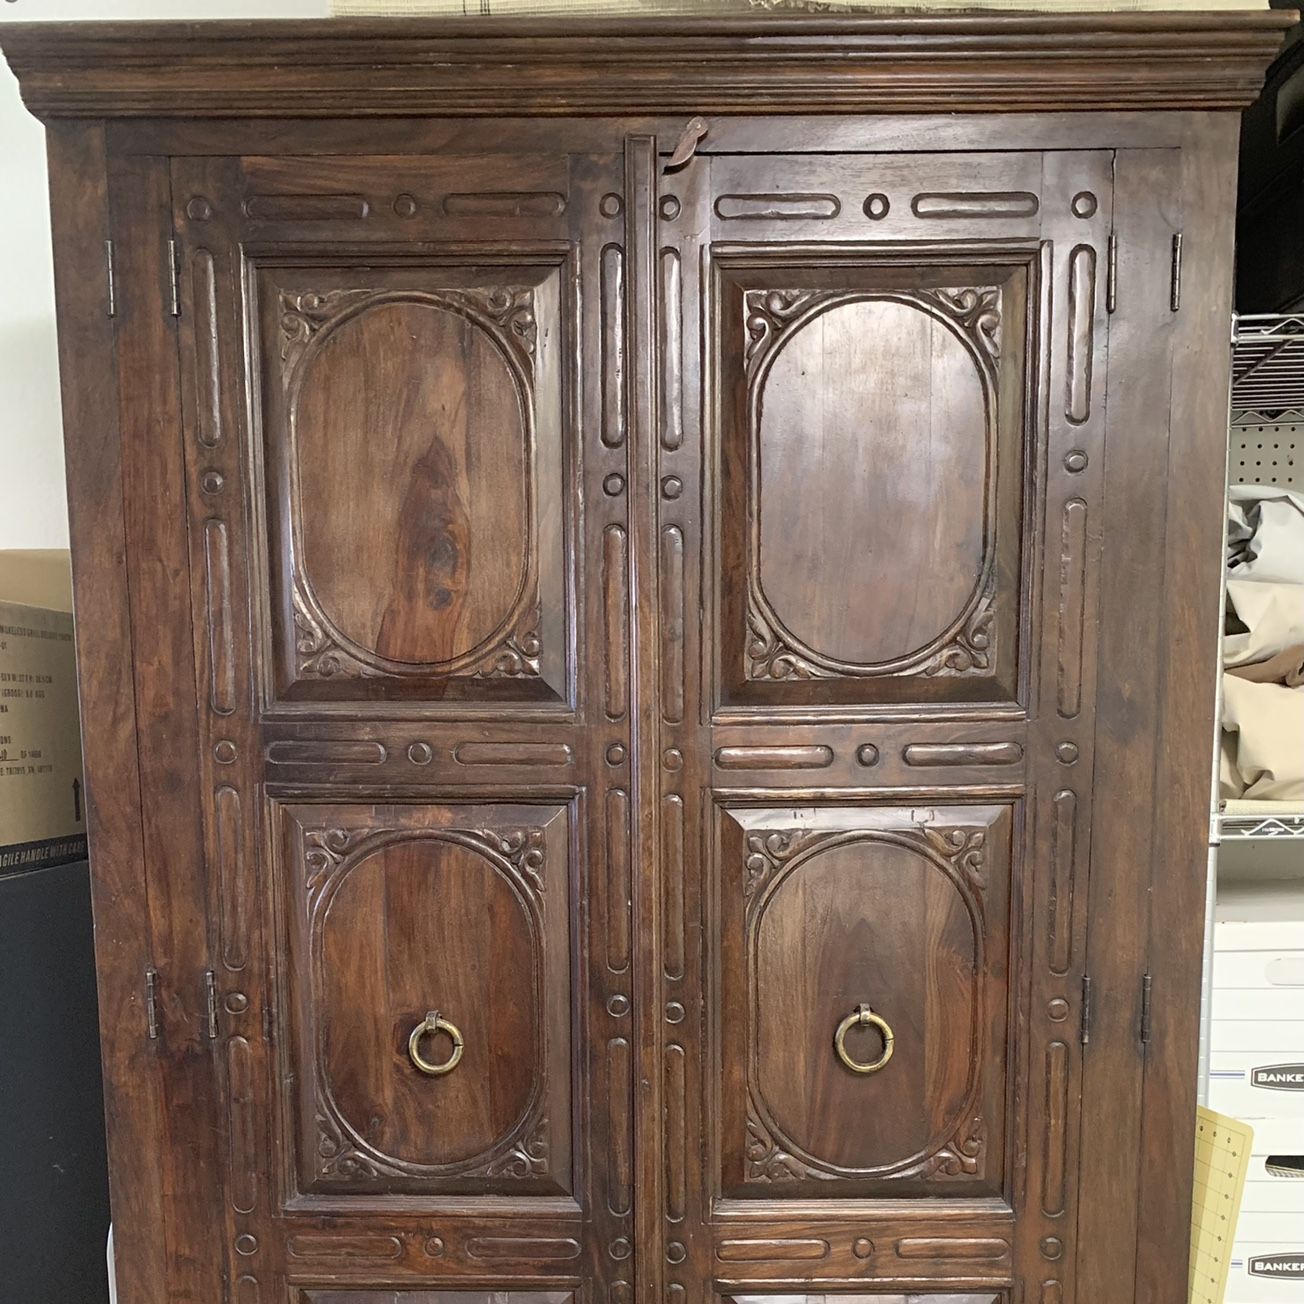 BEAUTIFULLY Crafted Rustic Wood Storage Cabinet  (Original Price $2,999)